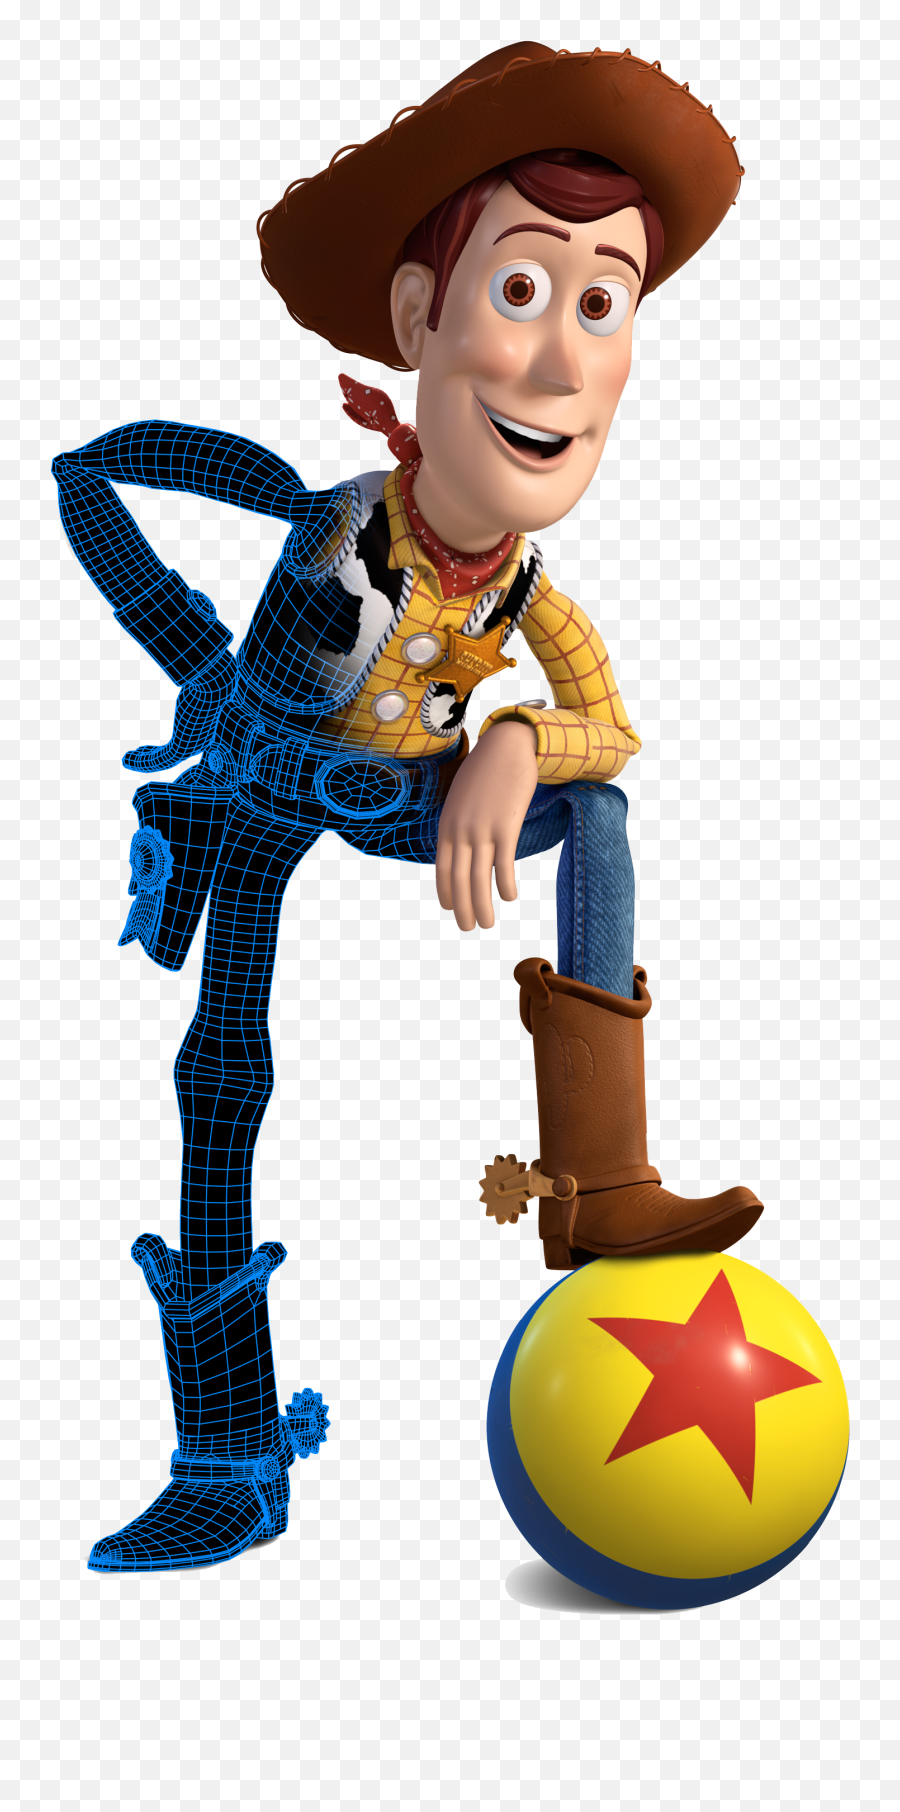 Sheriff Woody Png Transparent Background Real Woody Toy Story Png